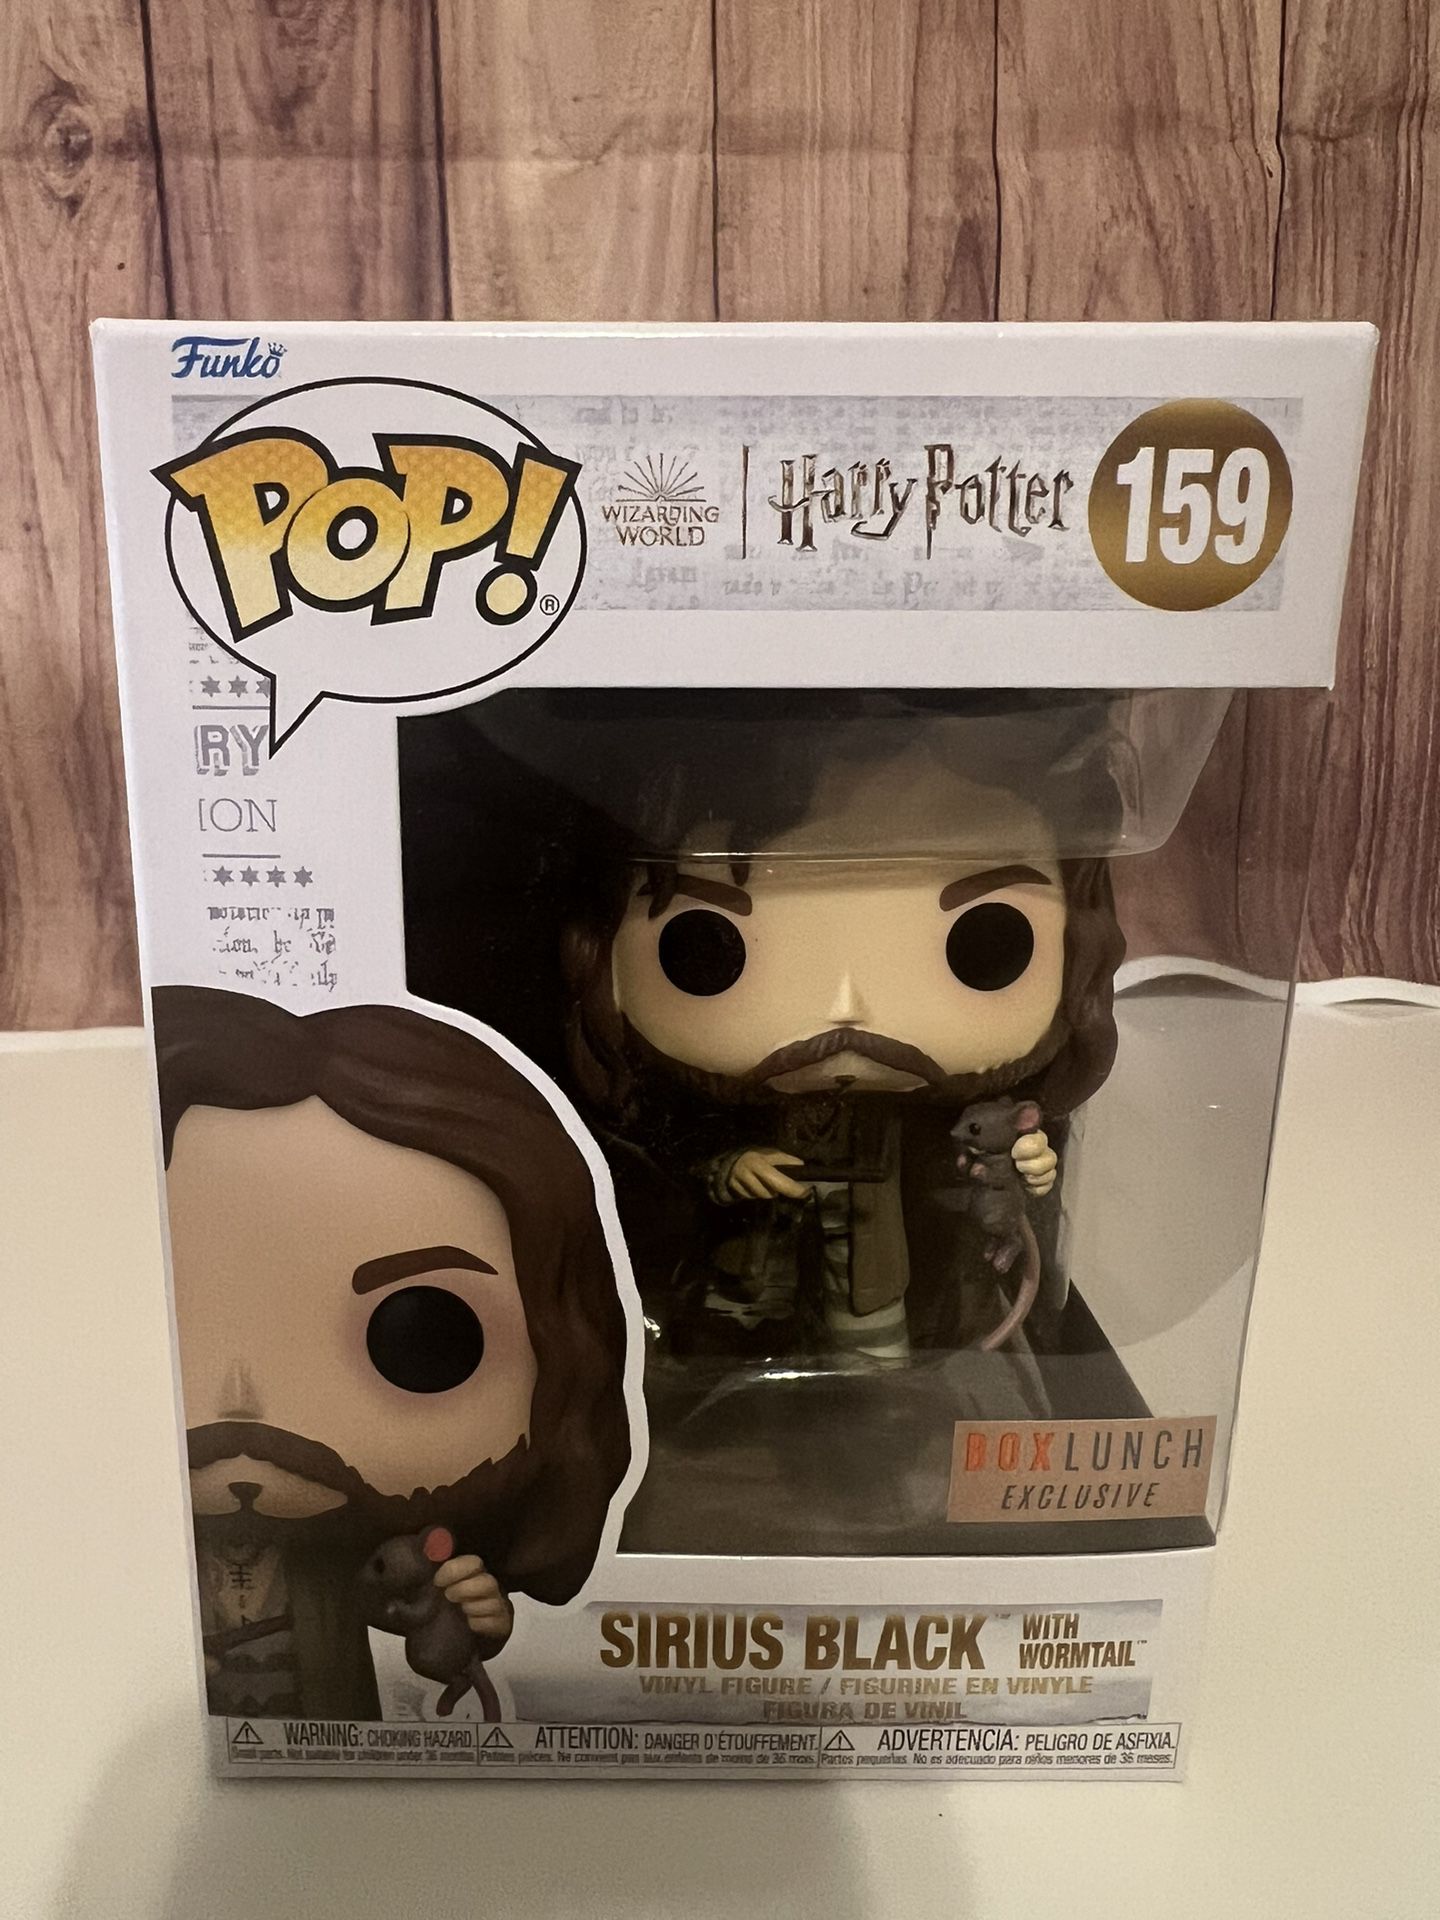 Funko Pop Harry Potter Sirius Black with Wormtail Boxlunch Exclusive